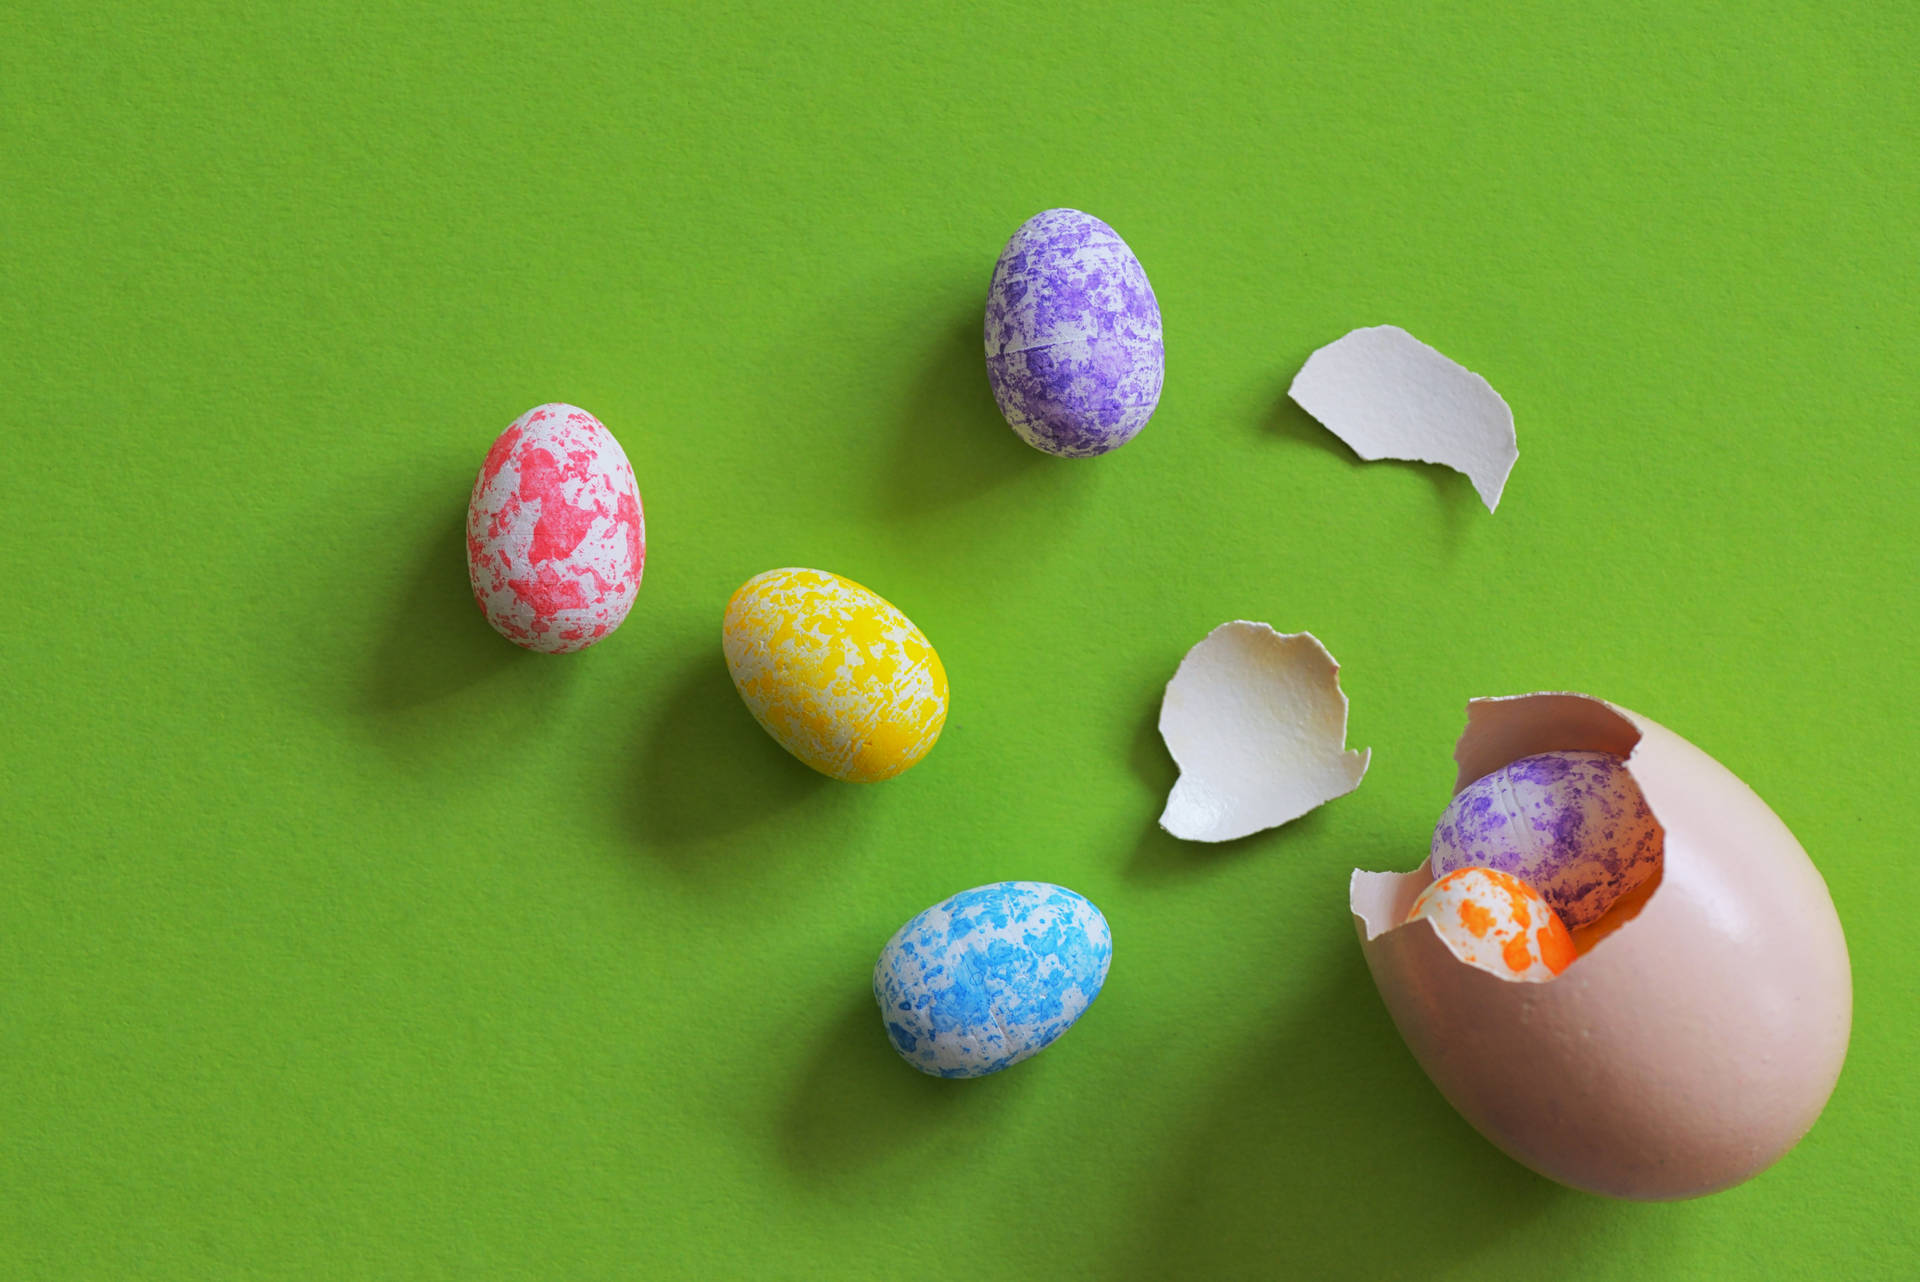 Celebrate Easter with Some Fun Cracked Eggshells Wallpaper